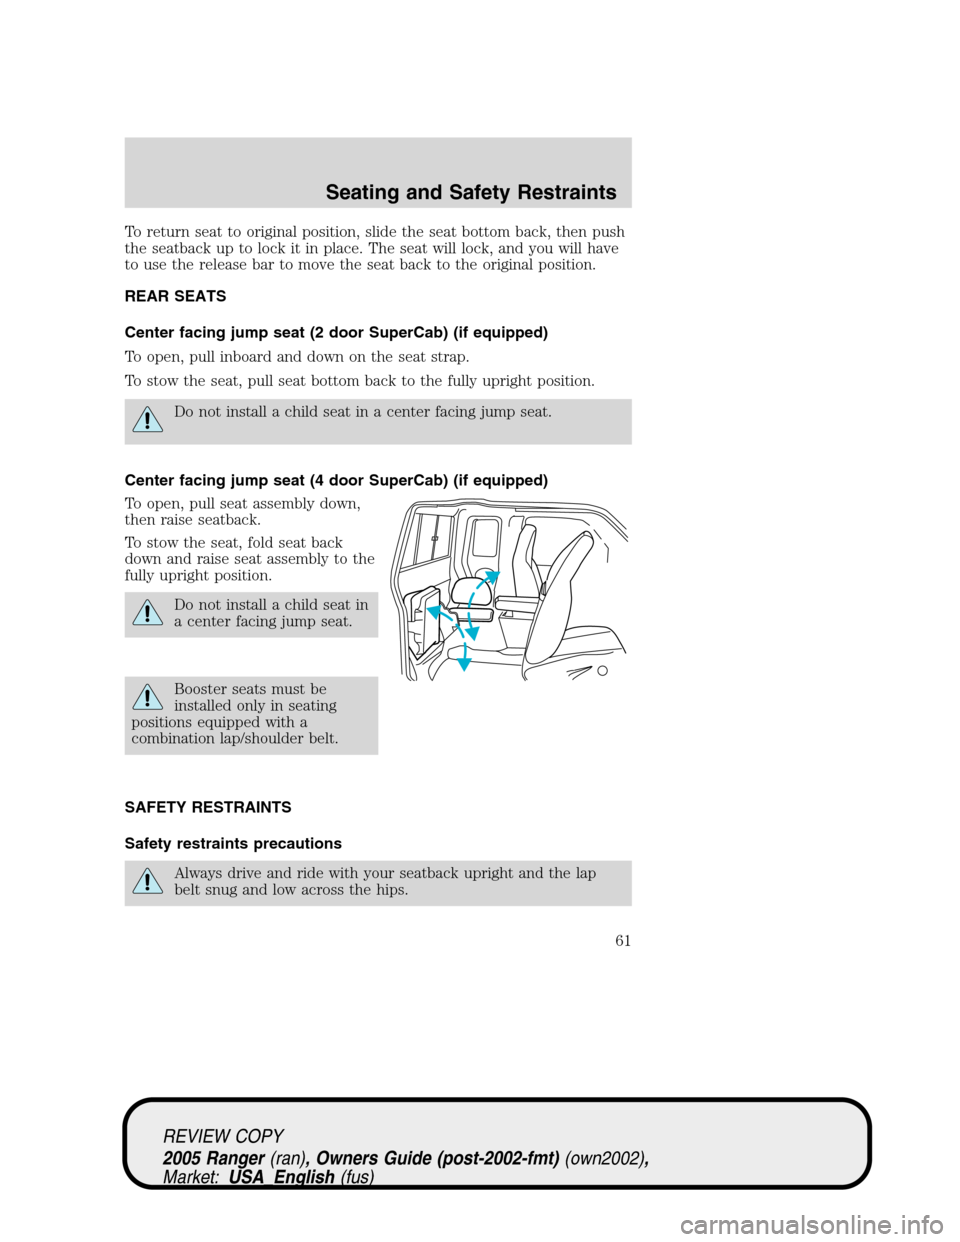 FORD RANGER 2005 2.G Repair Manual To return seat to original position, slide the seat bottom back, then push
the seatback up to lock it in place. The seat will lock, and you will have
to use the release bar to move the seat back to th